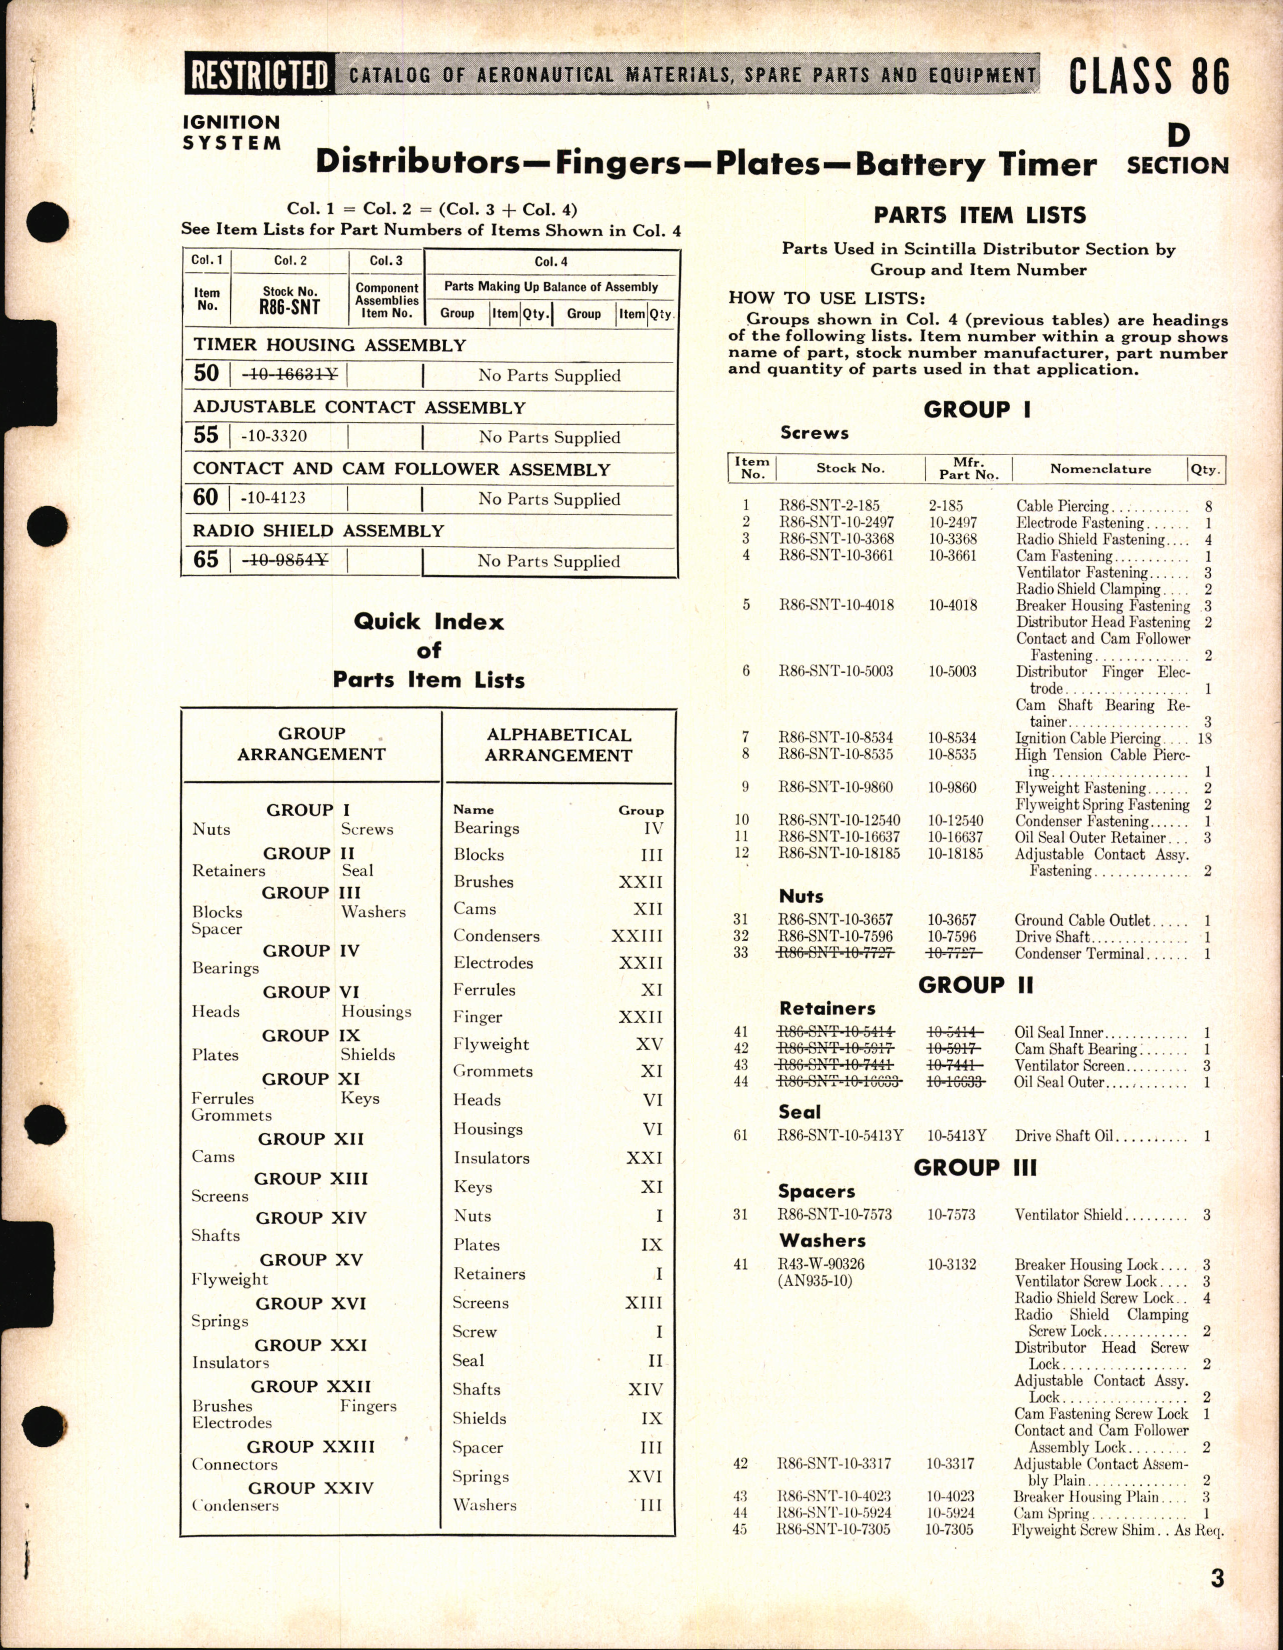 Sample page 3 from AirCorps Library document: Ignition systems Section D Assemblies and Parts for Pratt and Whitney and Miscellaneous Engines